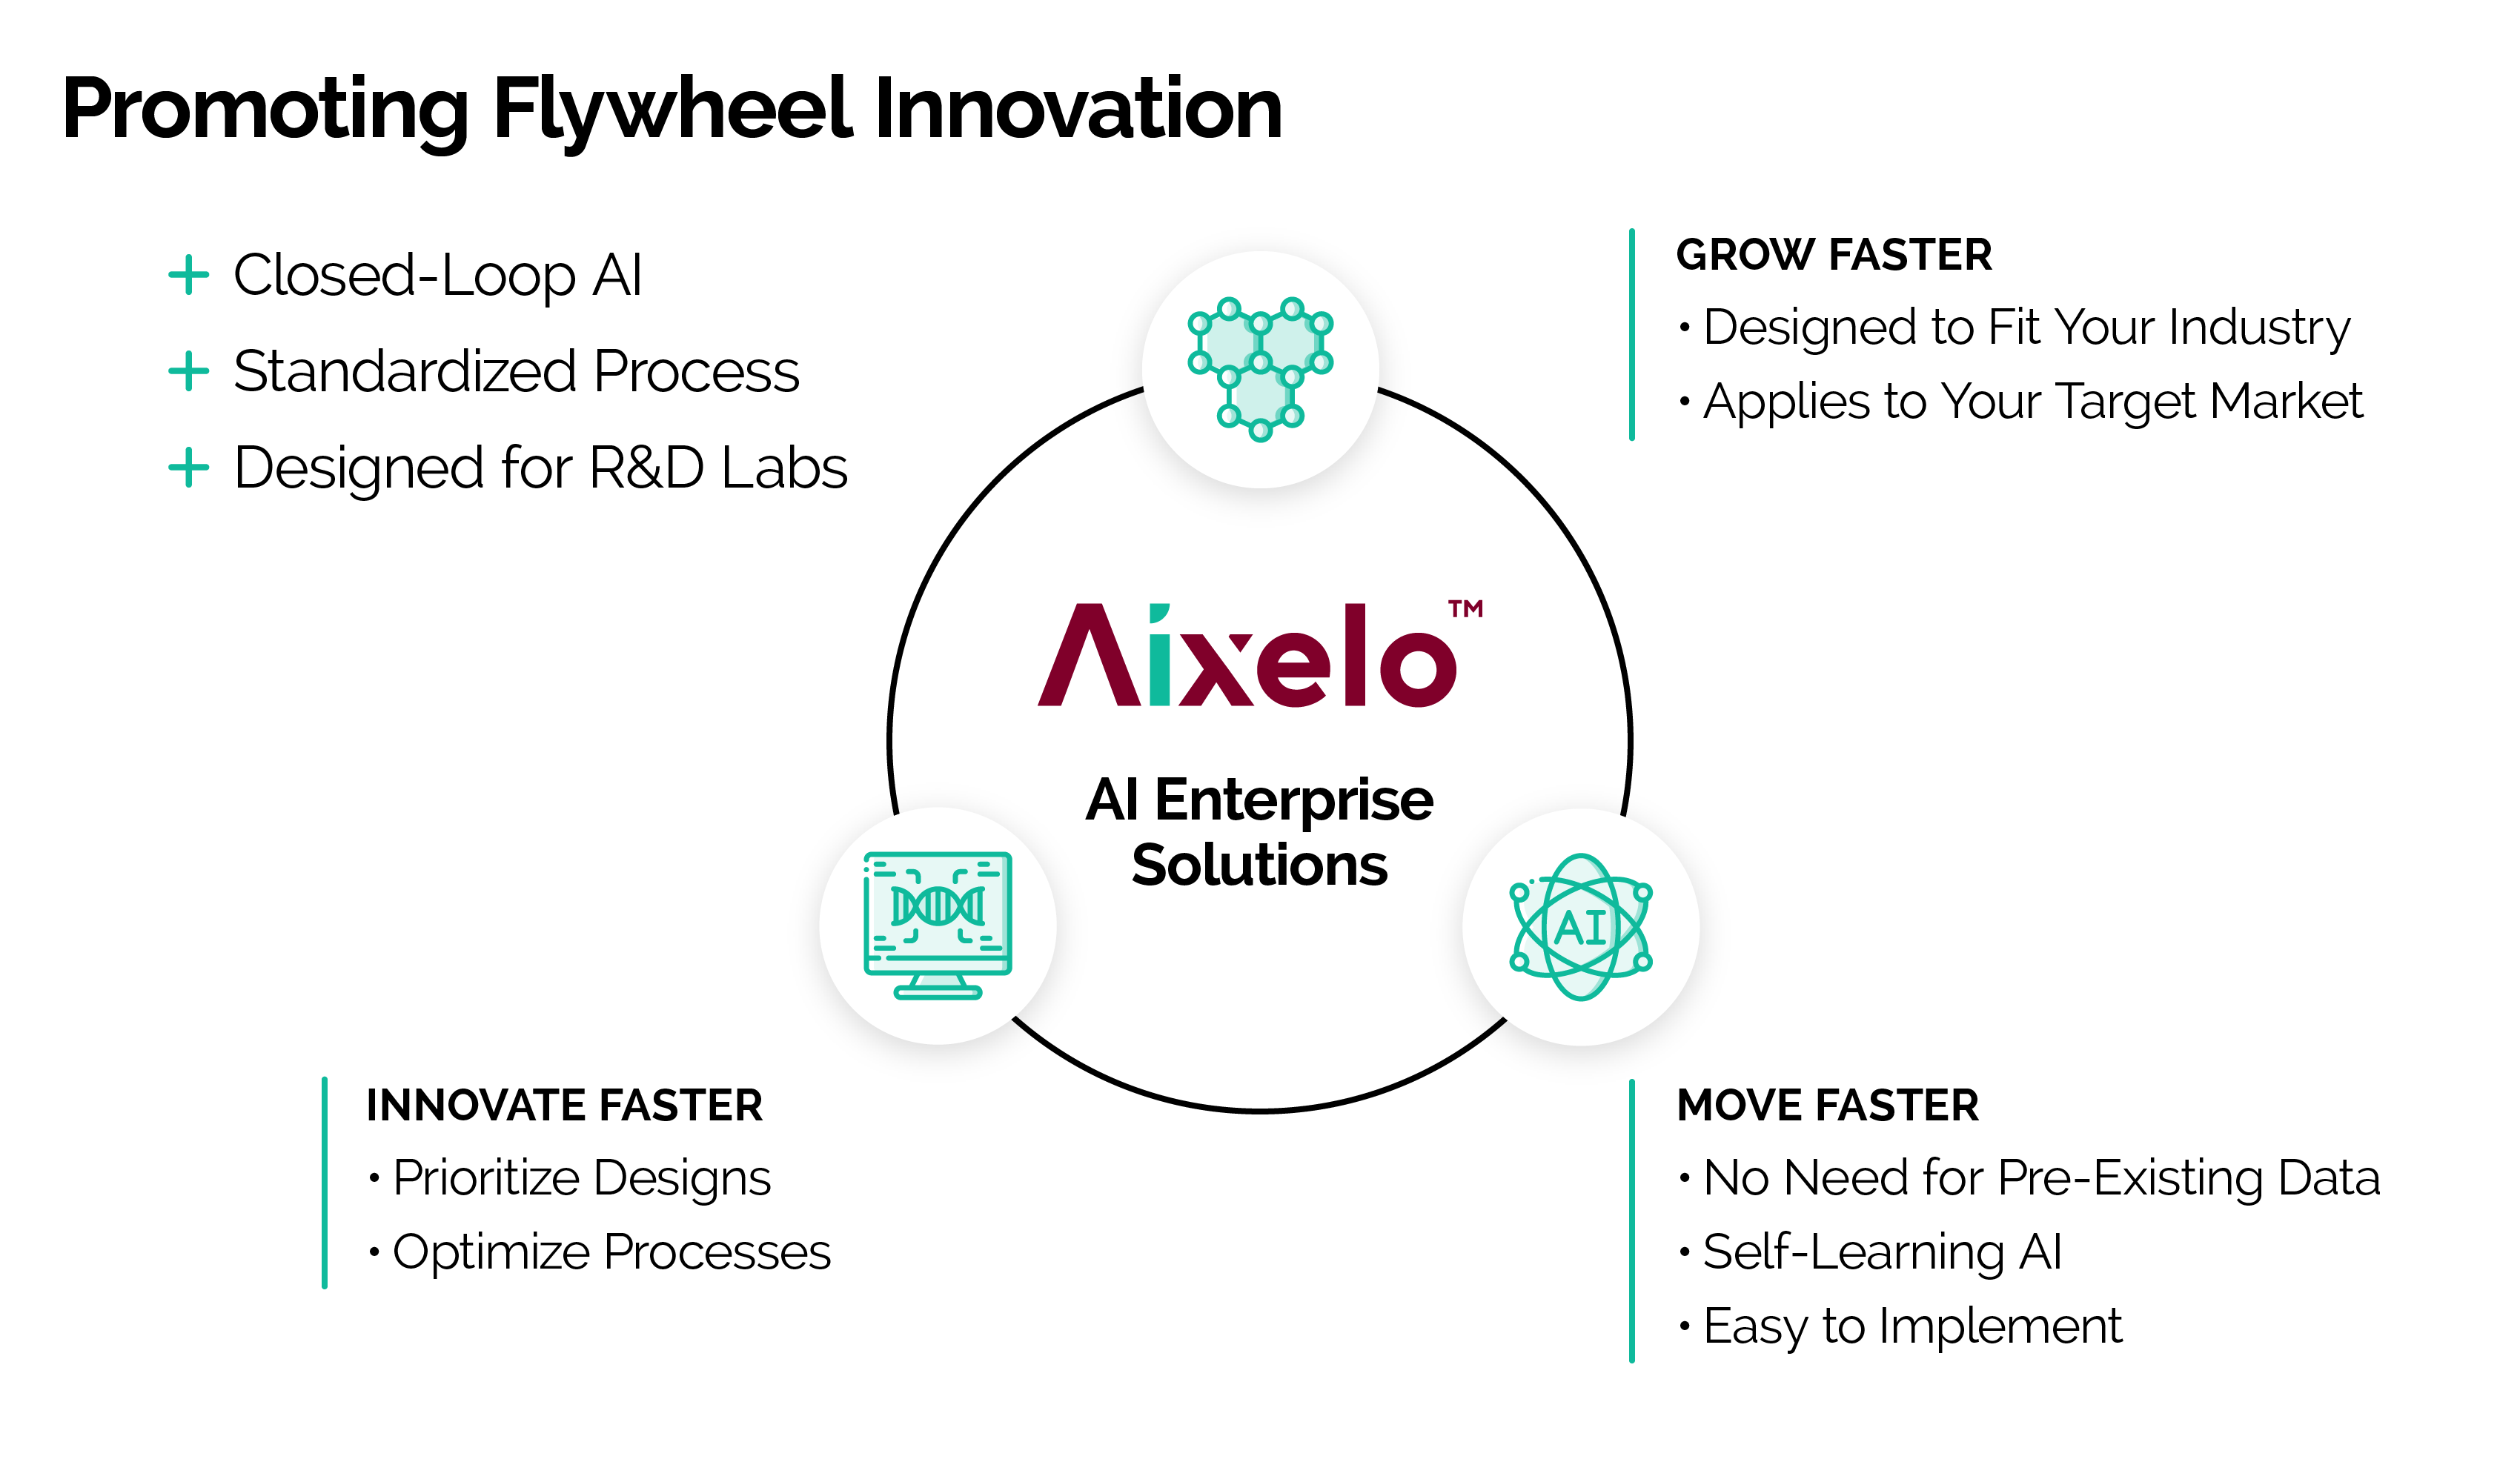 Aixelo Promotes Flywheel Innovation with Closed-Loop AI, Standardized Process, Designed for R&D Labs